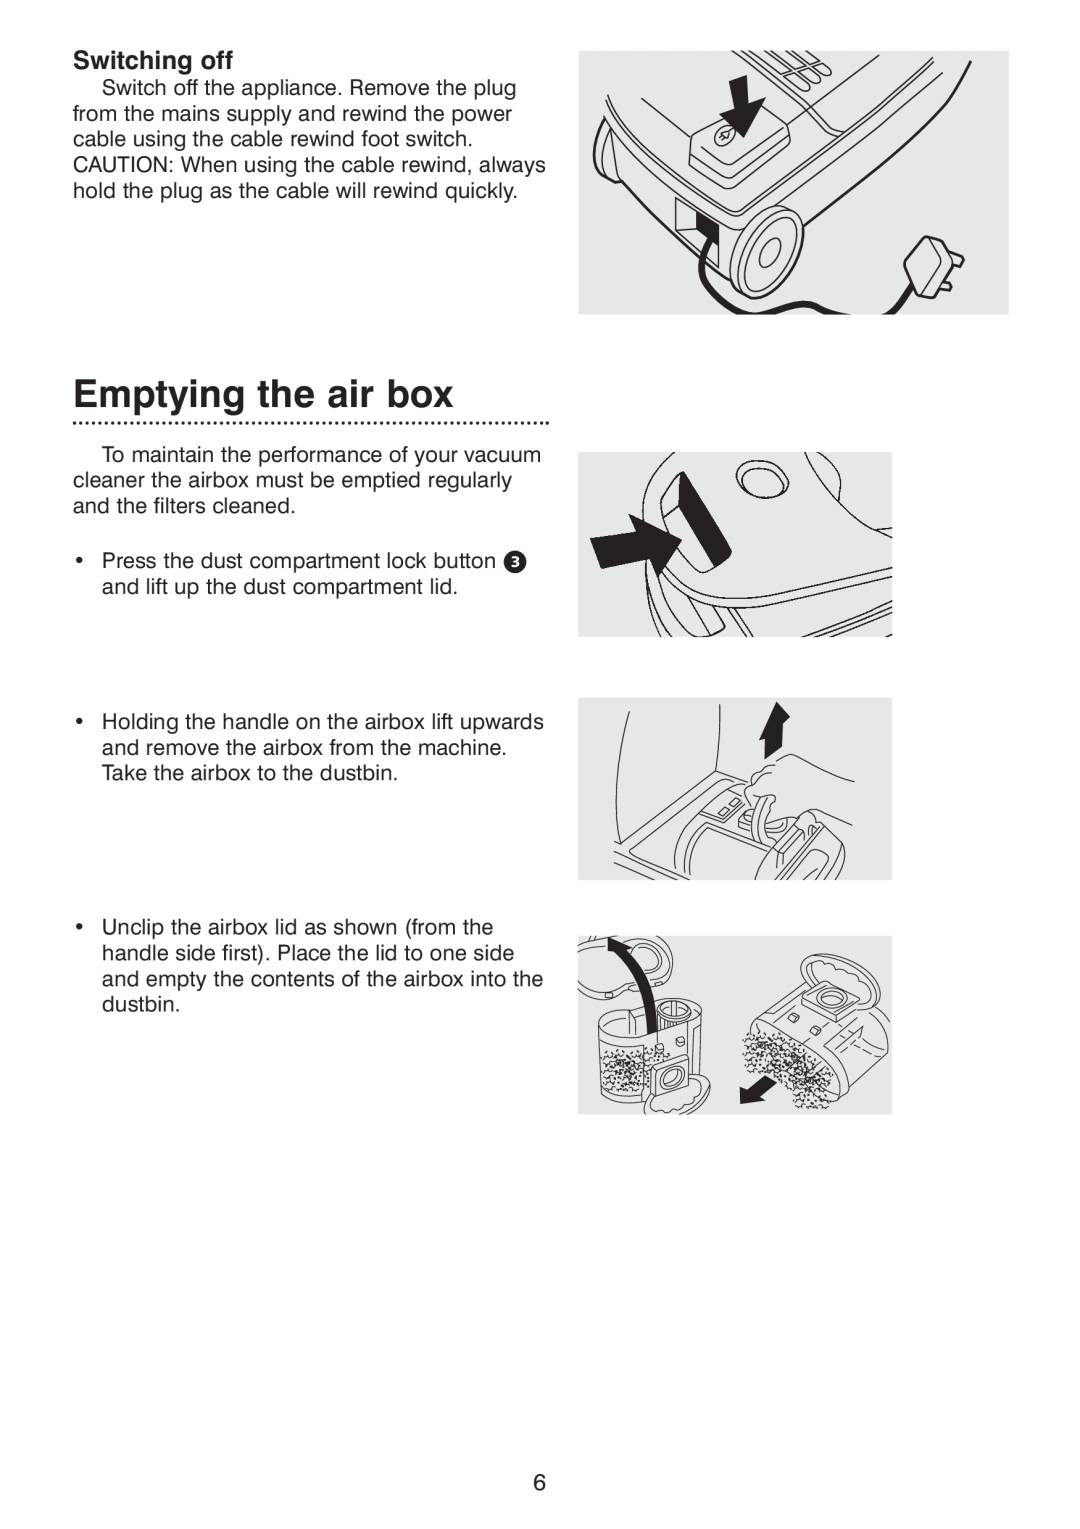 Morphy Richards Ecovac 70096 Rev 2 (Page 1) manual Emptying the air box, Switching off 